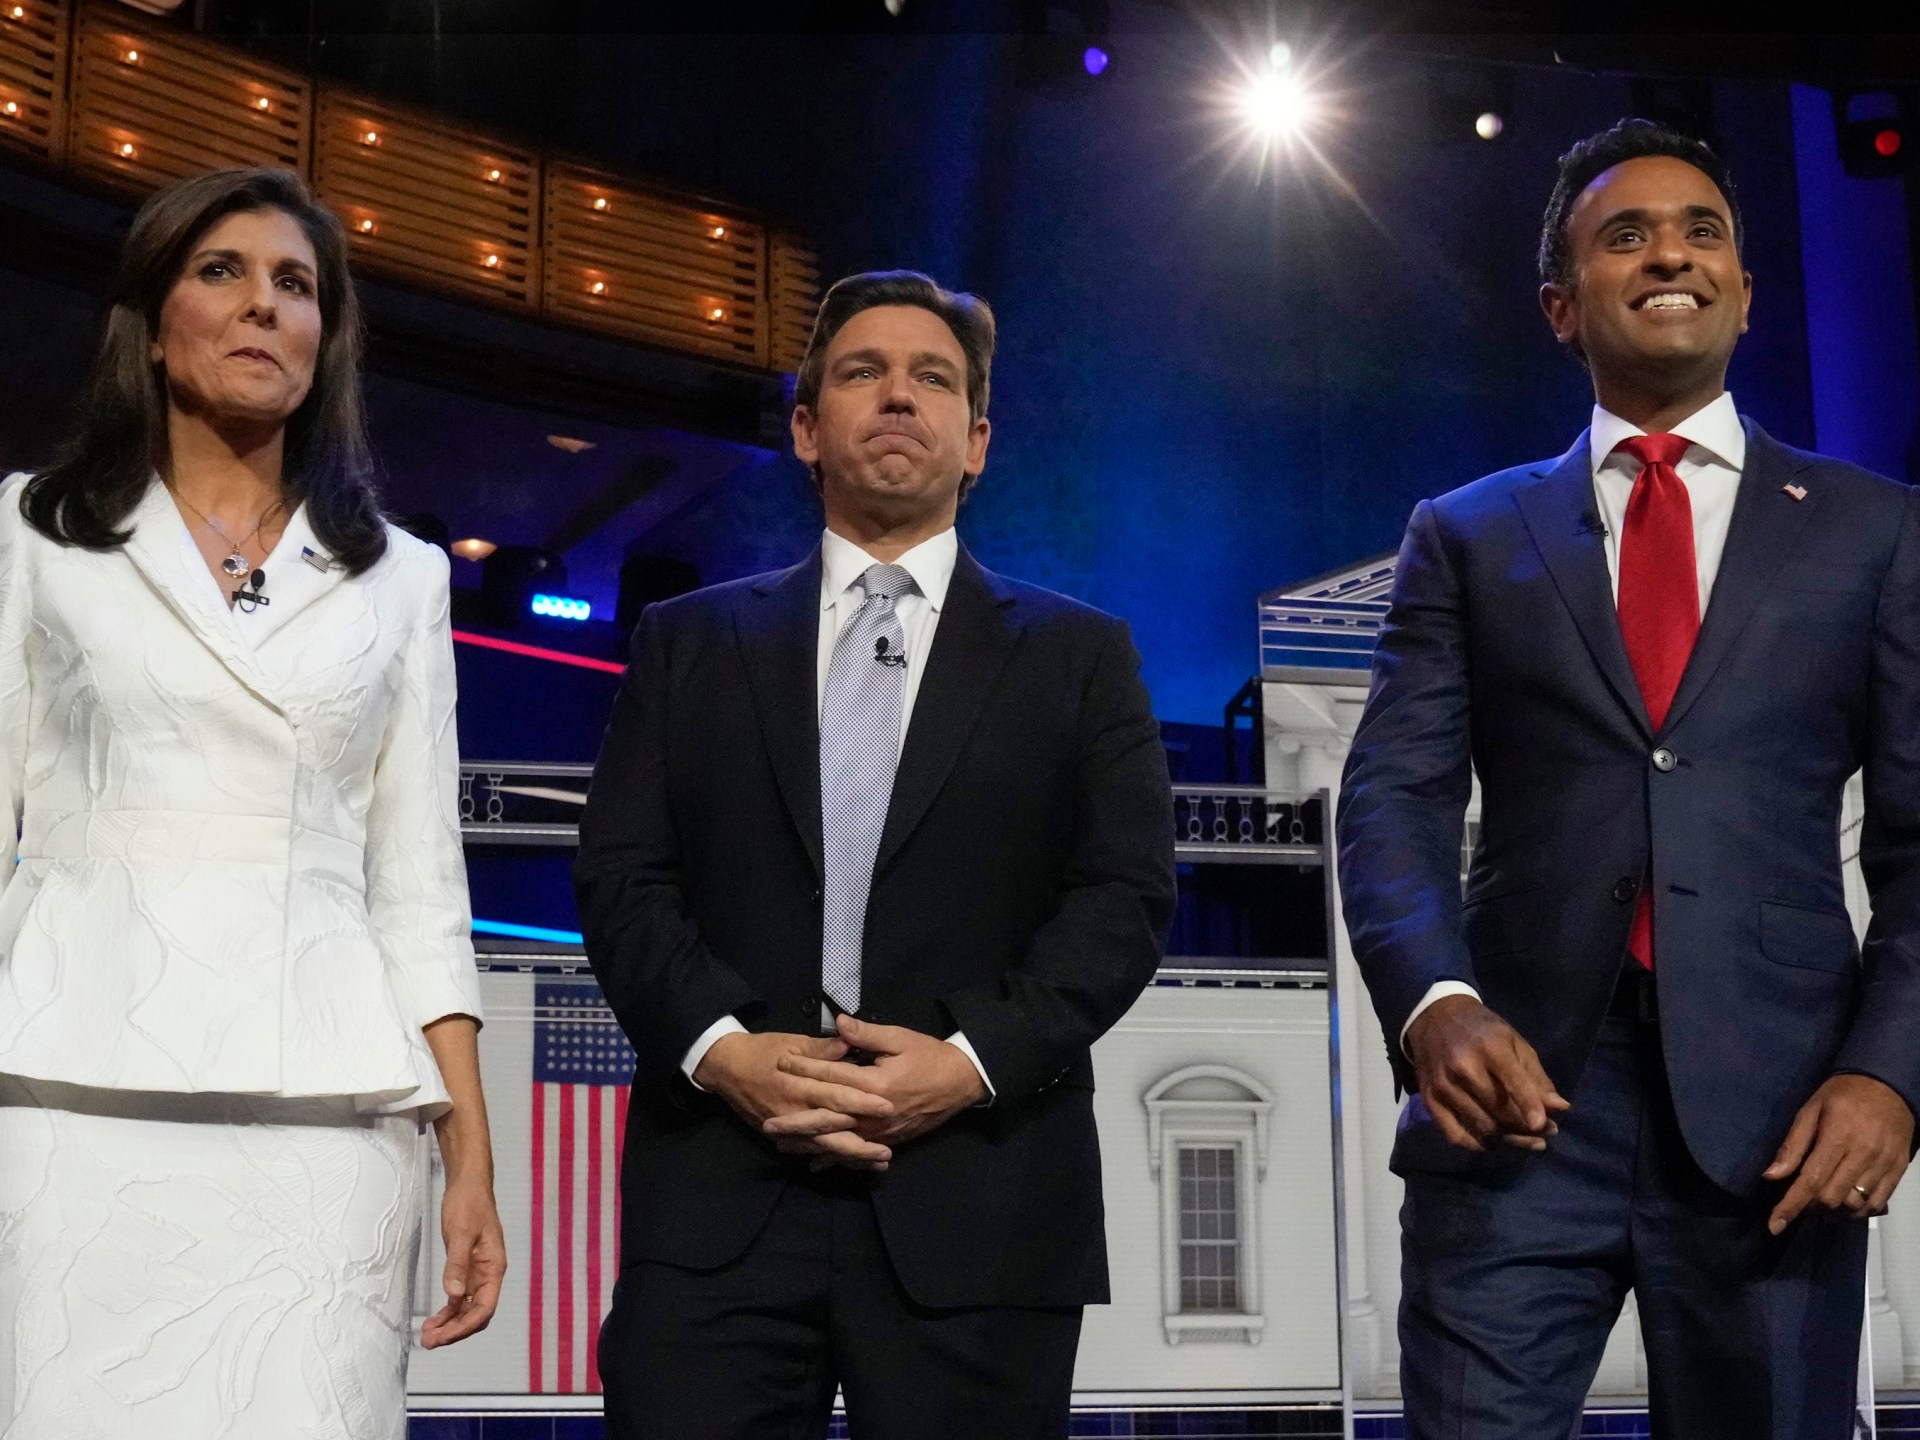 ‘A declaration of independence’: How NewsNation landed a Republican debate - aljazeera